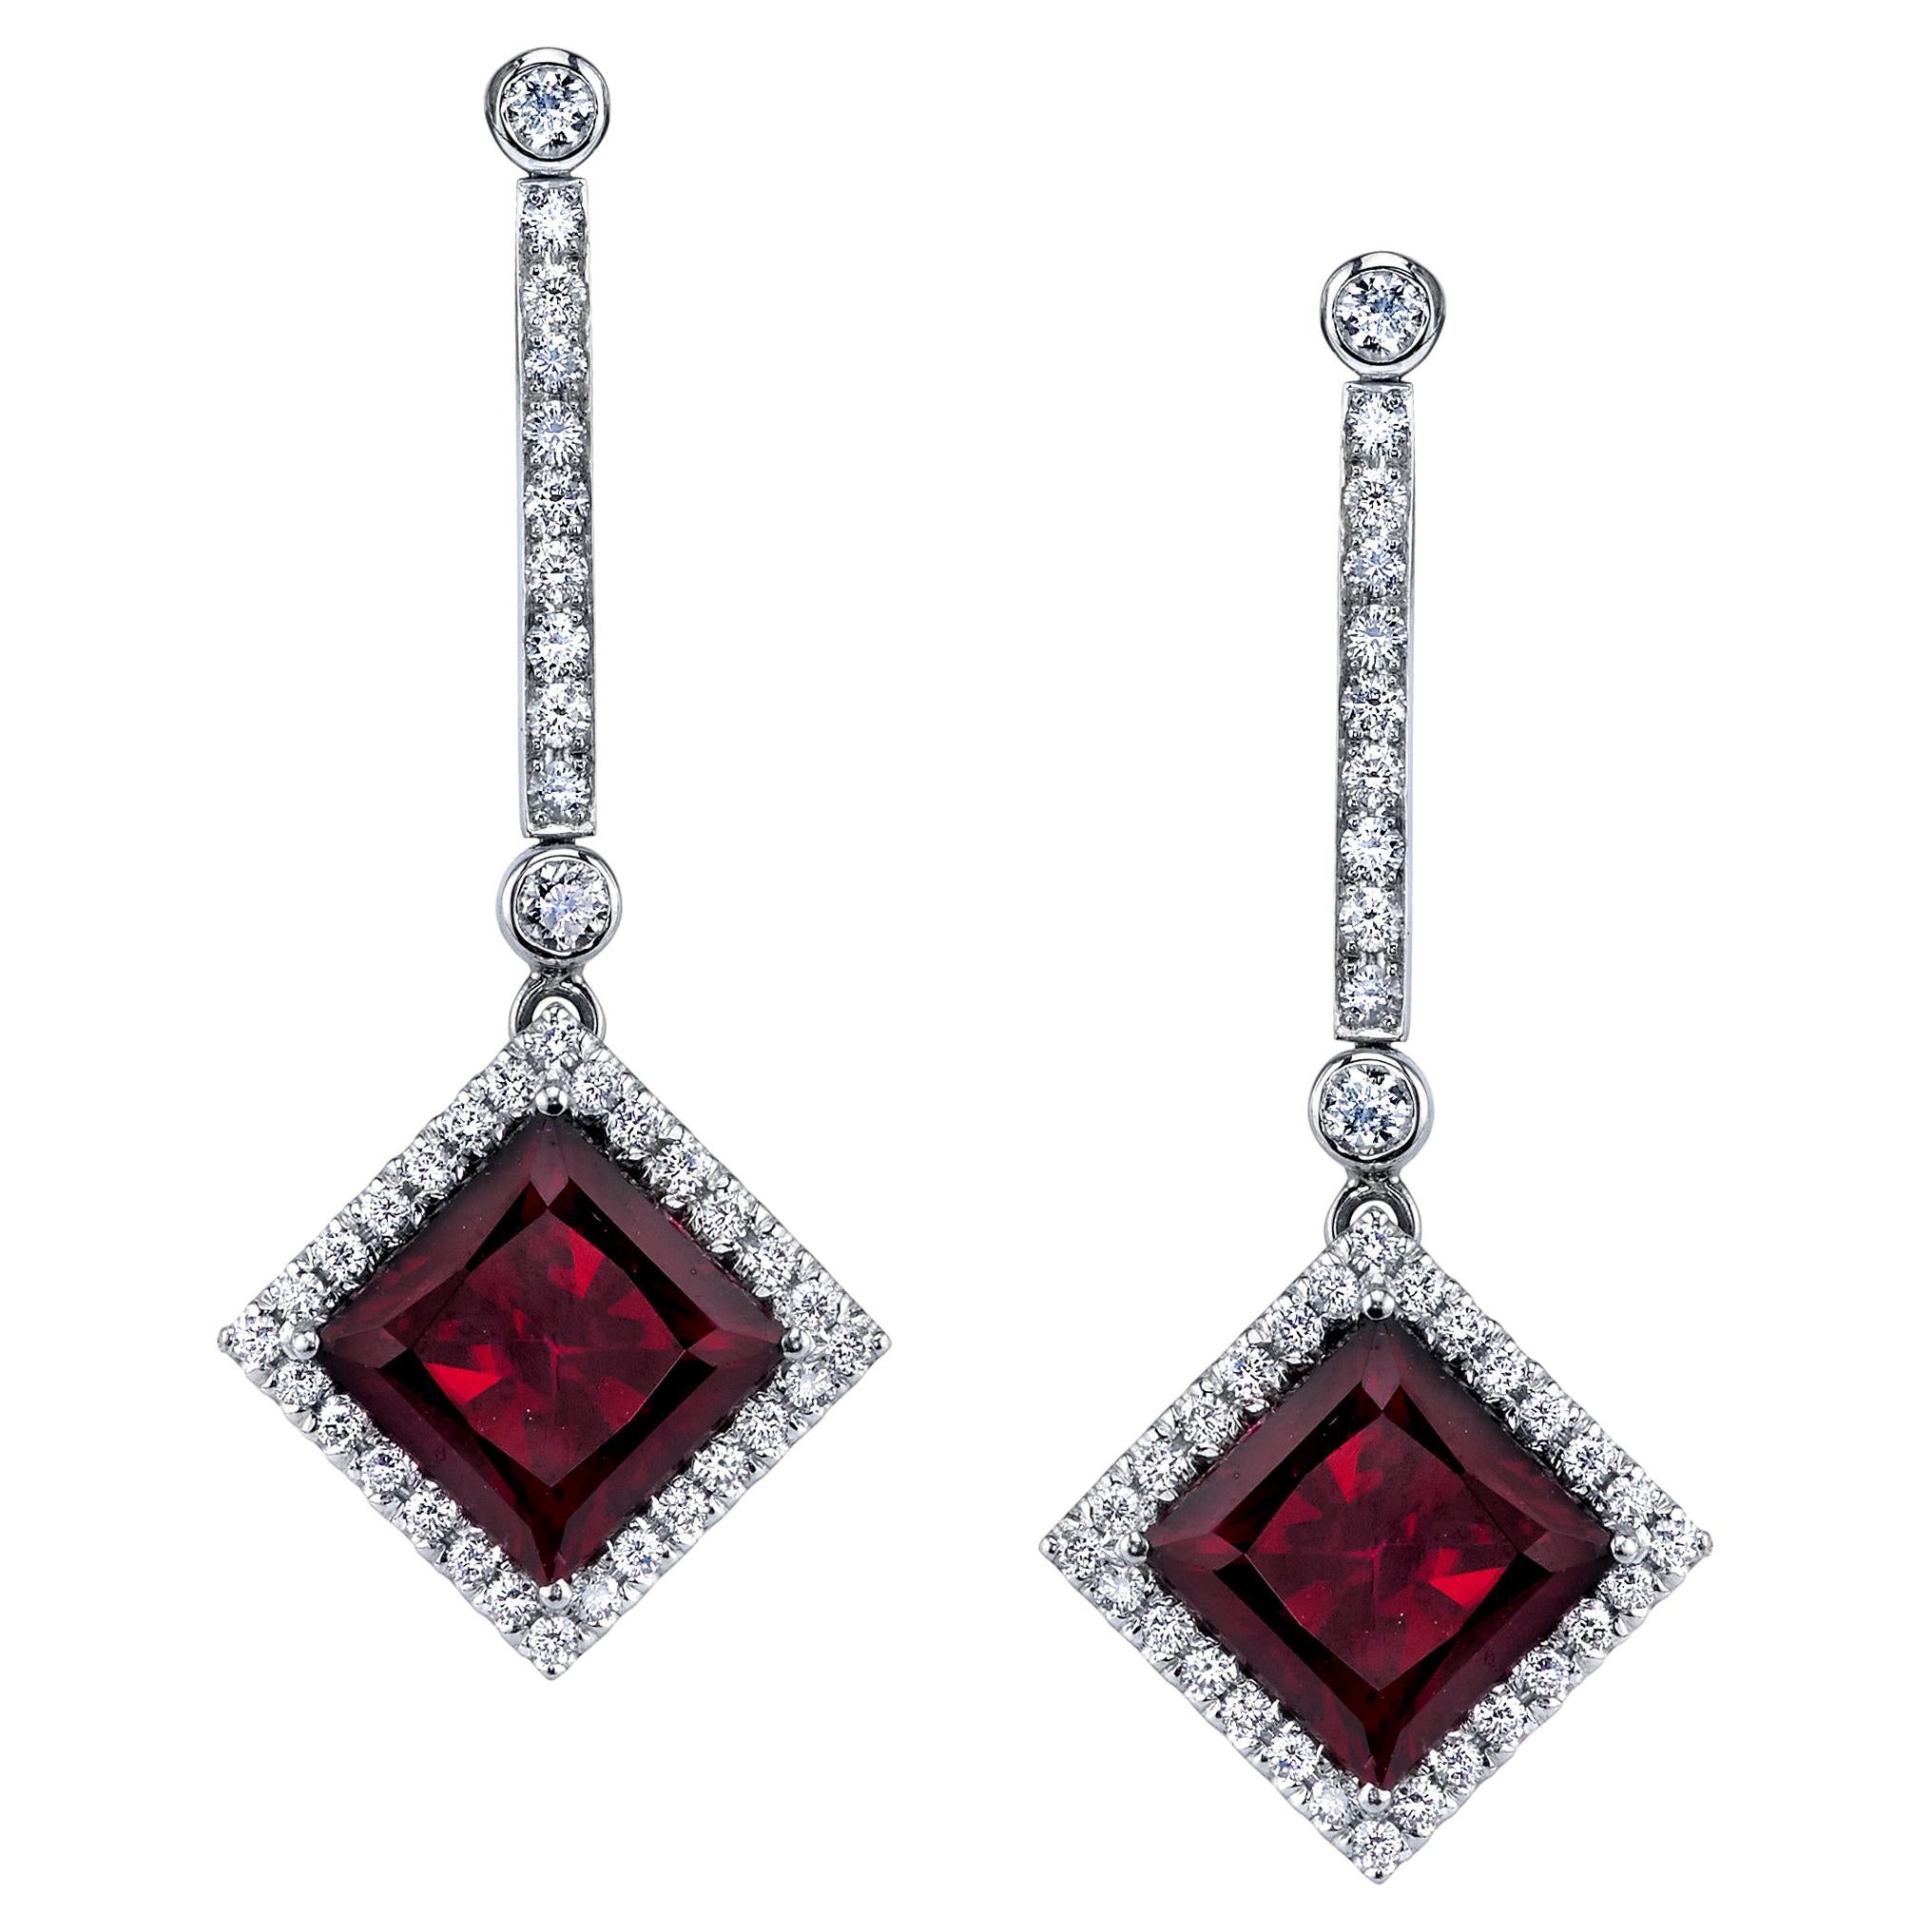  Red Tourmaline and Diamond Dangle Earrings in White Gold, 6.50 Carats Total For Sale